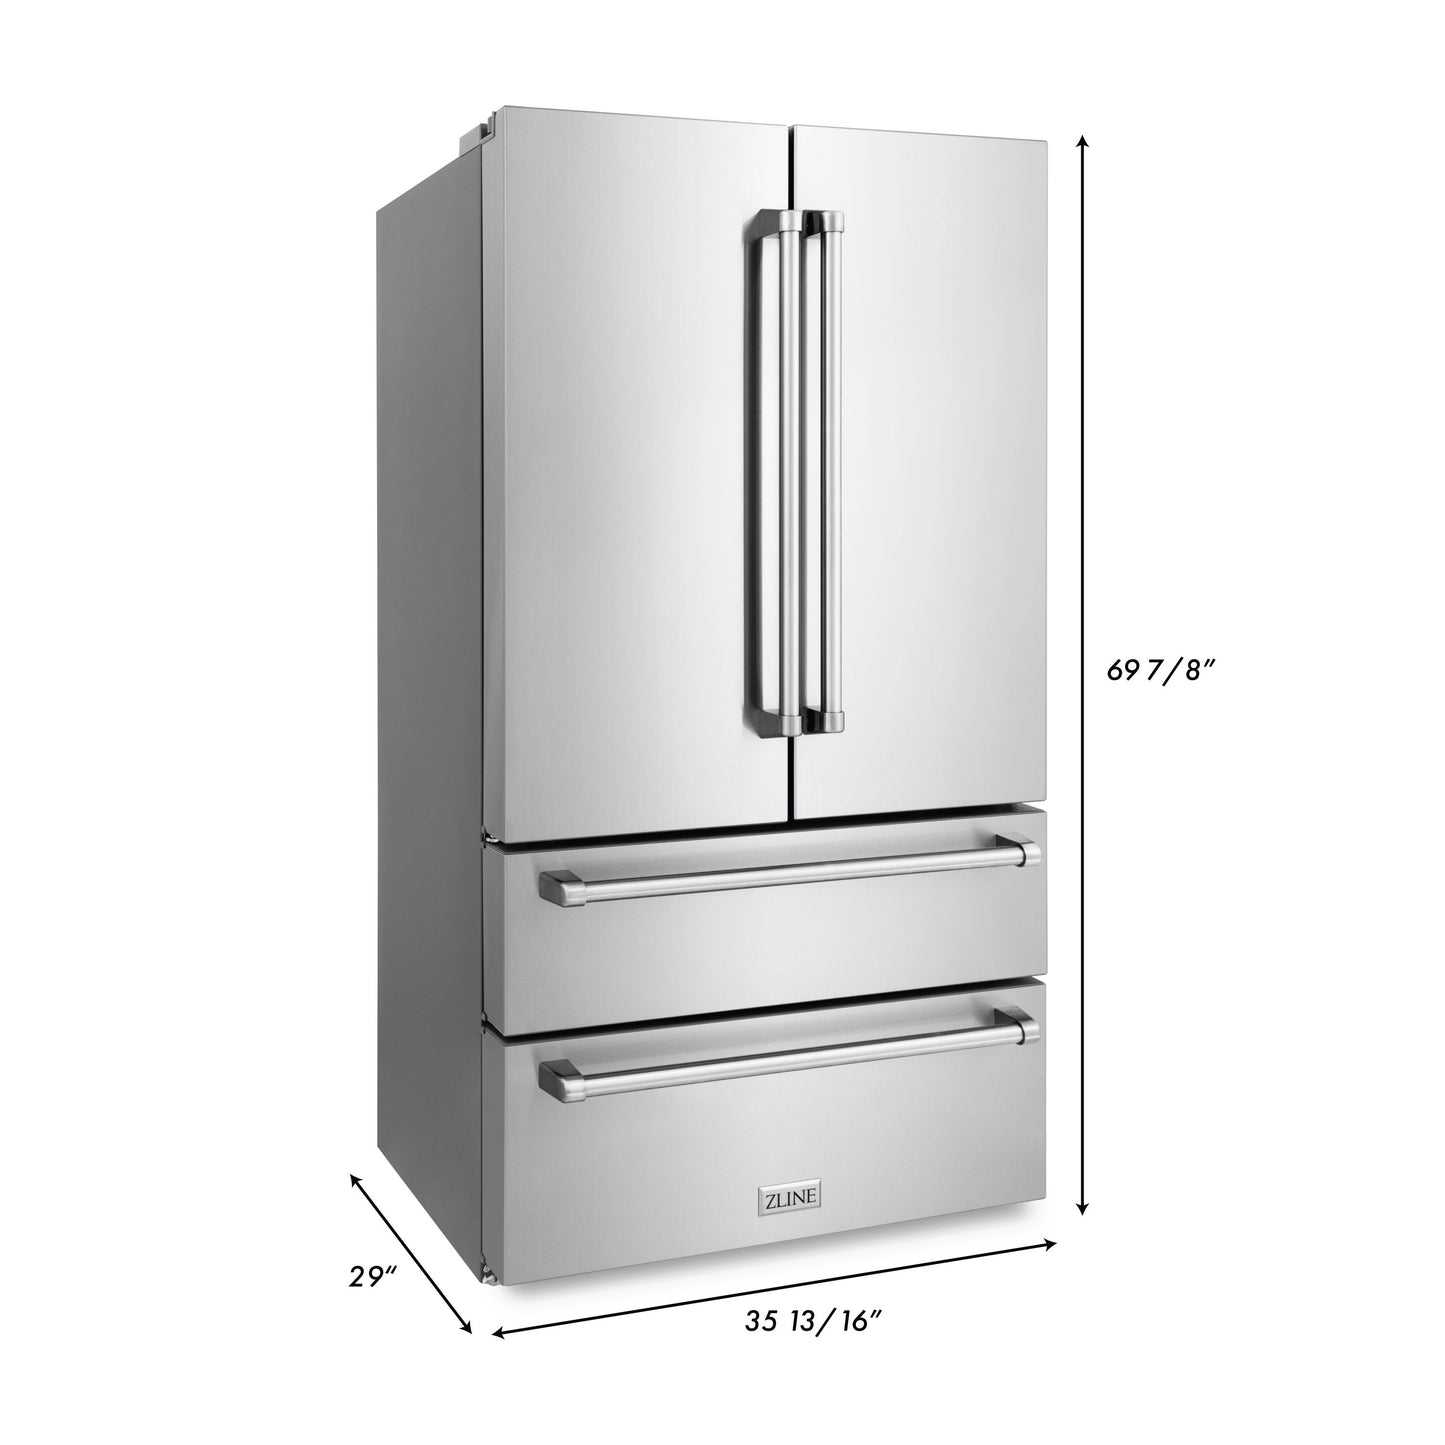 ZLINE Stainless Steel Refrigerator with Freestanding French Doors & Ice Maker - 36-Inch, 22.5 Cu. Ft.